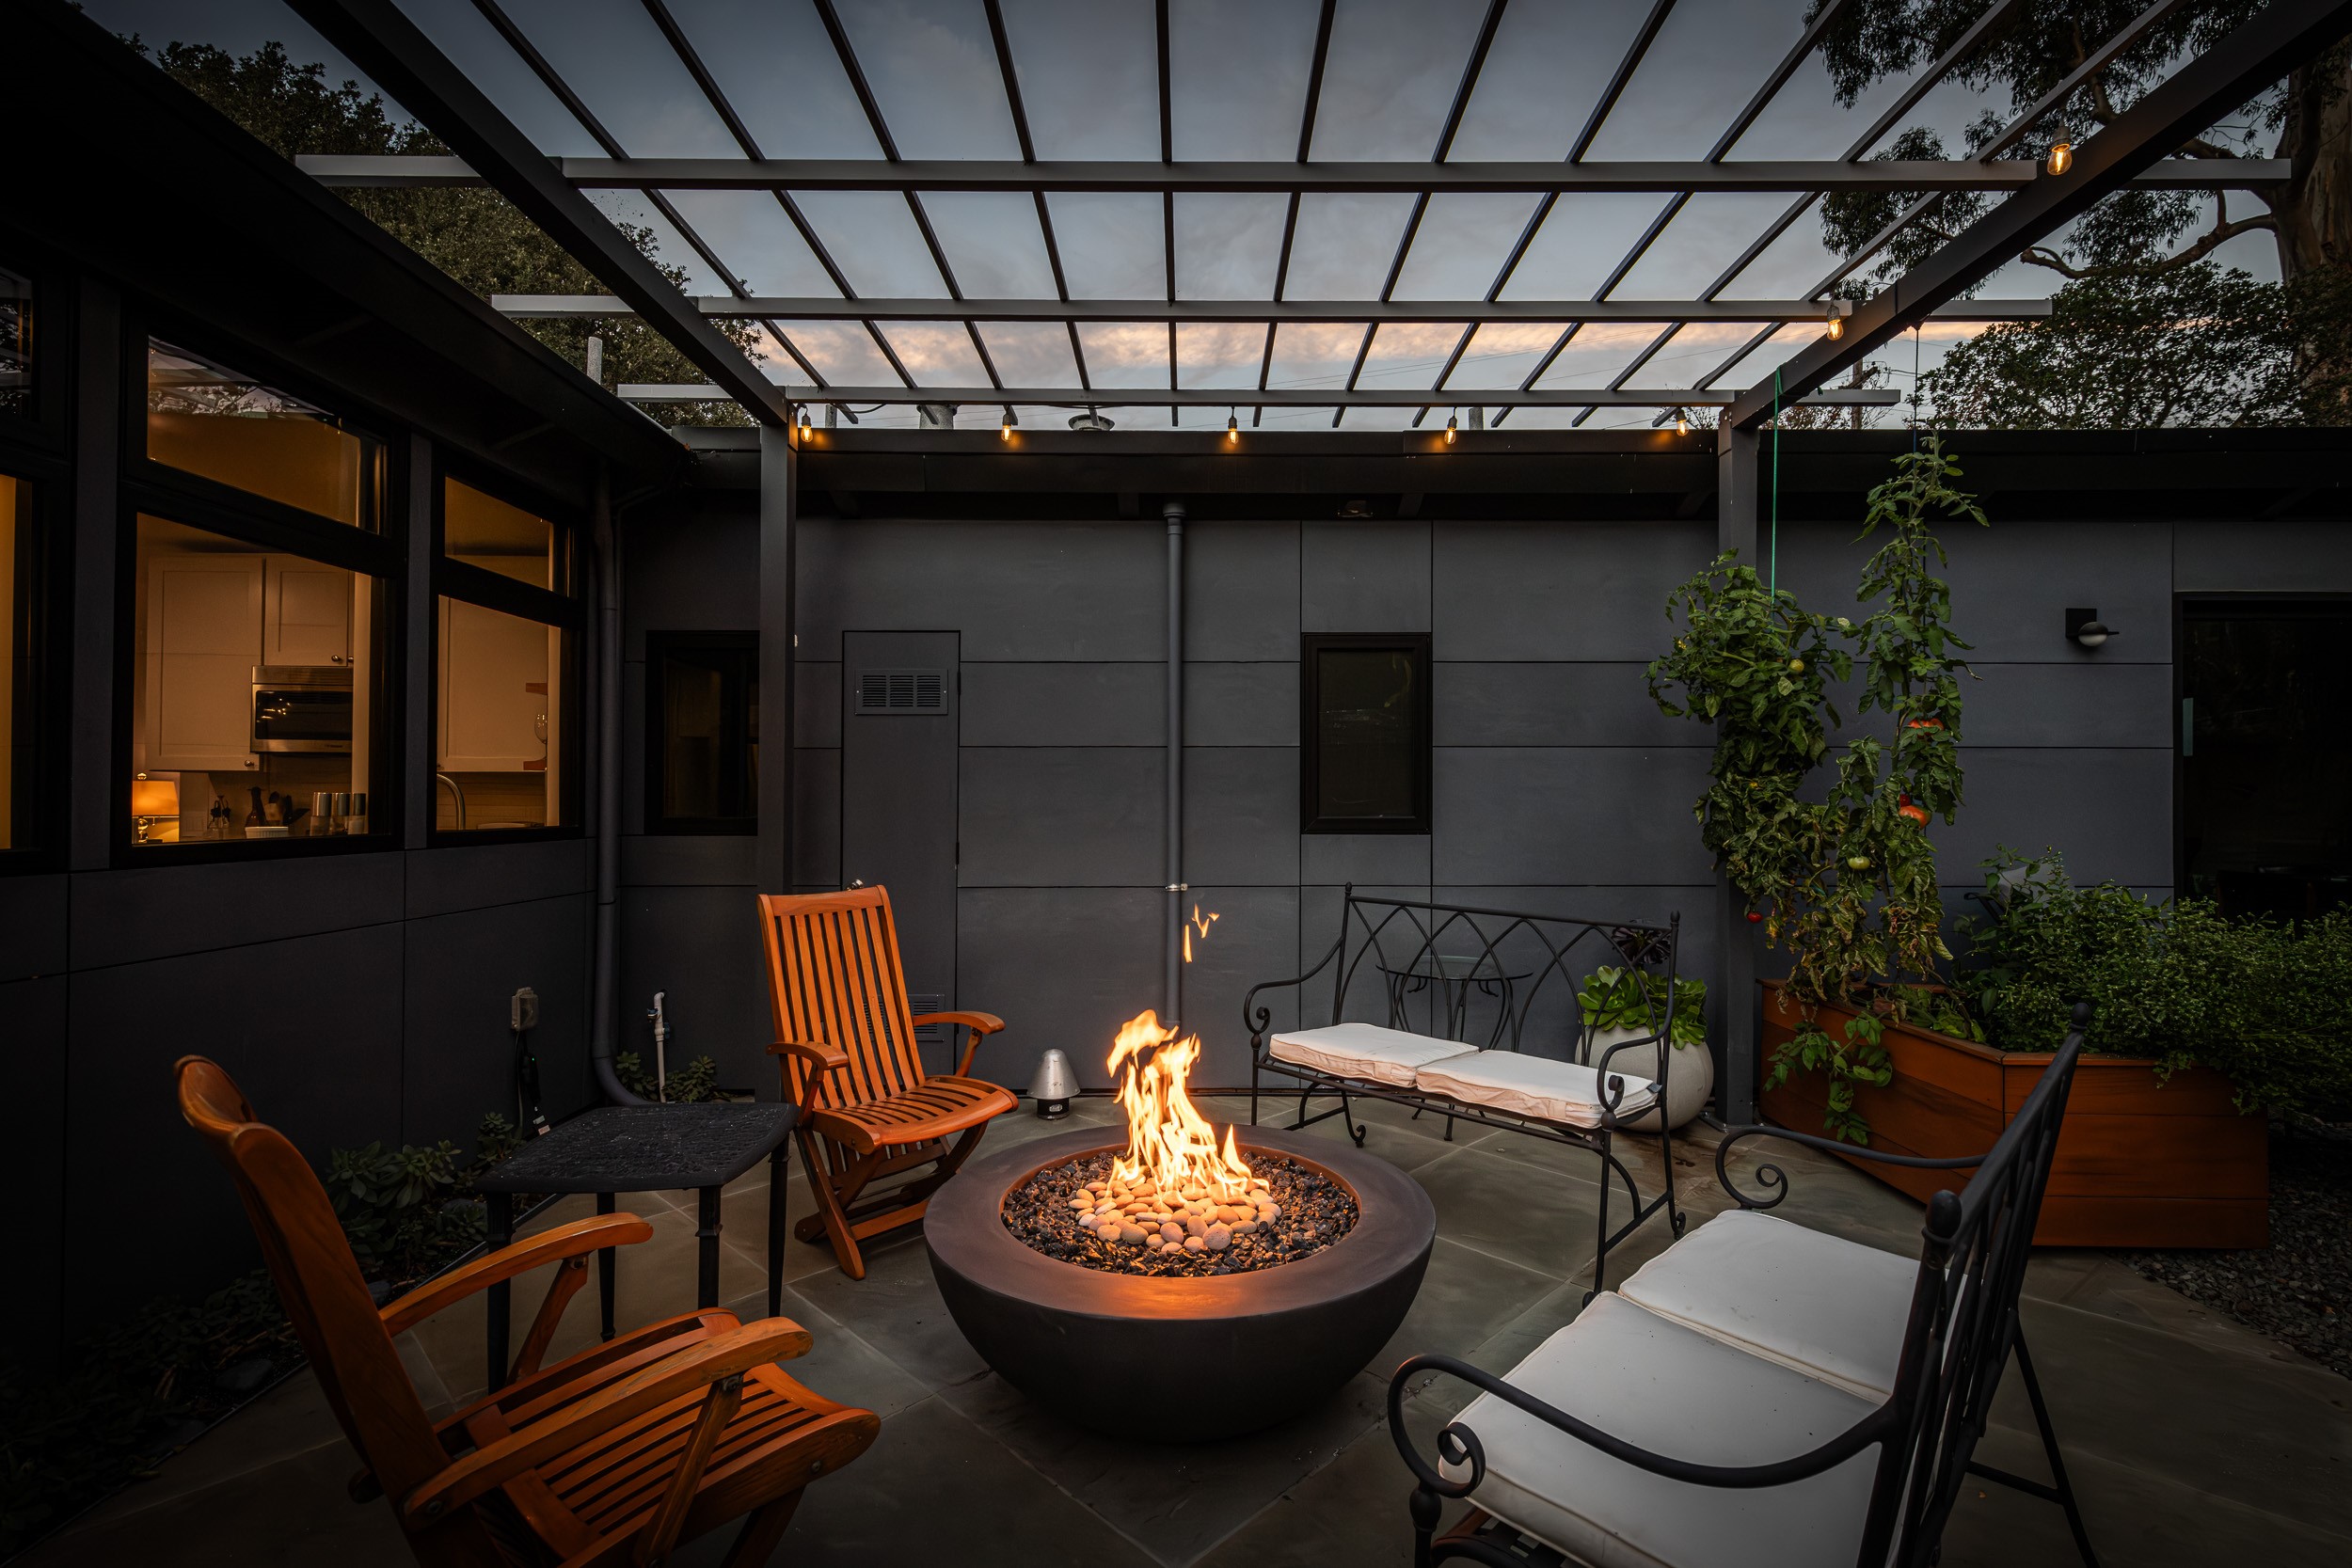 A firepit sits in the middle of a garden patio